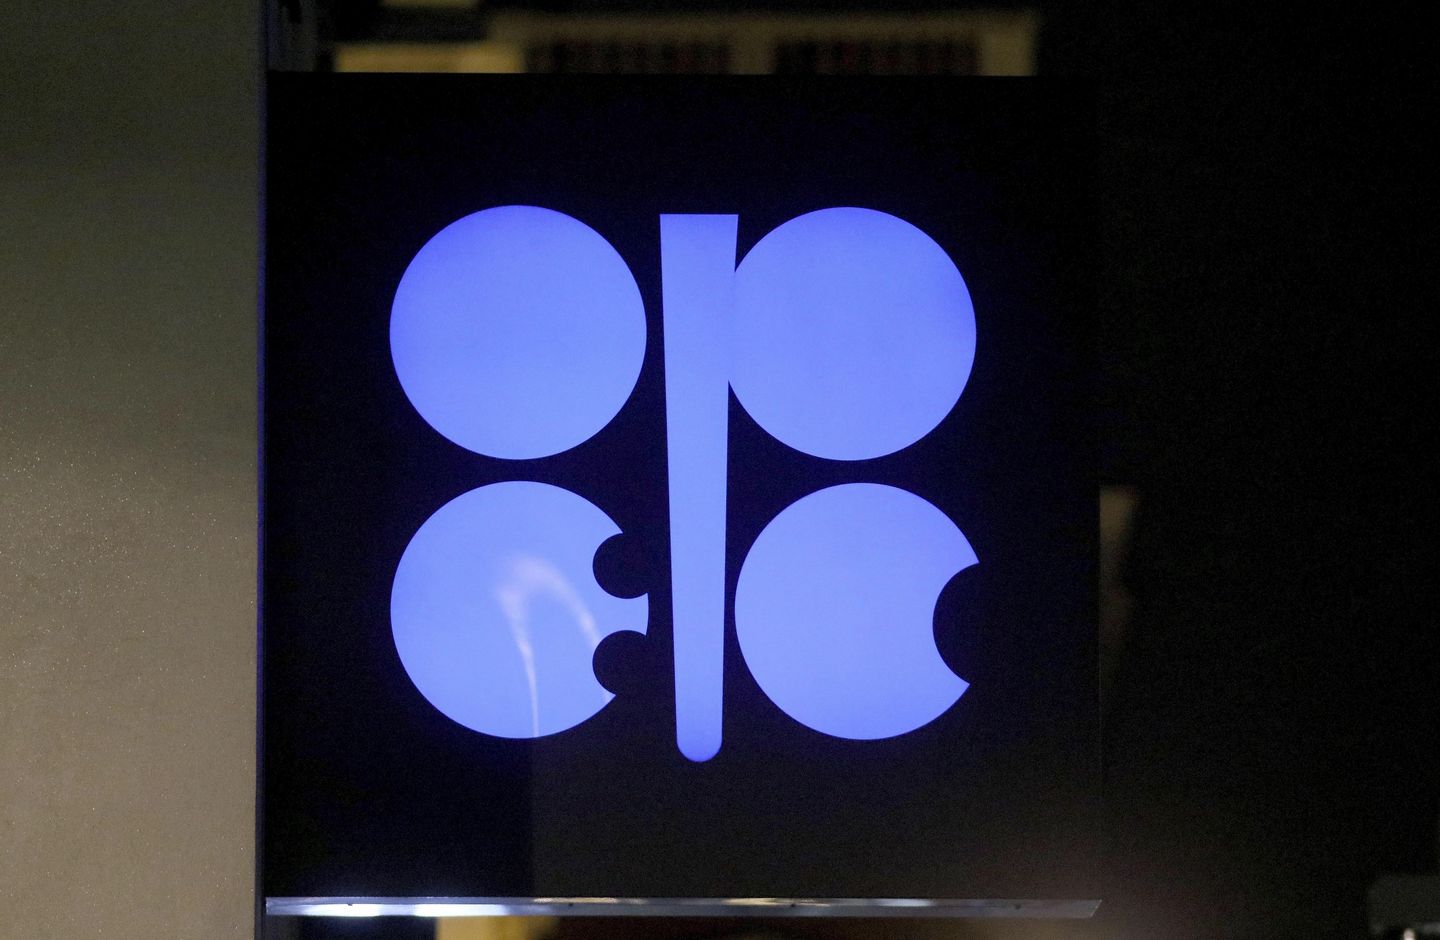 Oil at 7-year high after OPEC+ decides on cautious increase